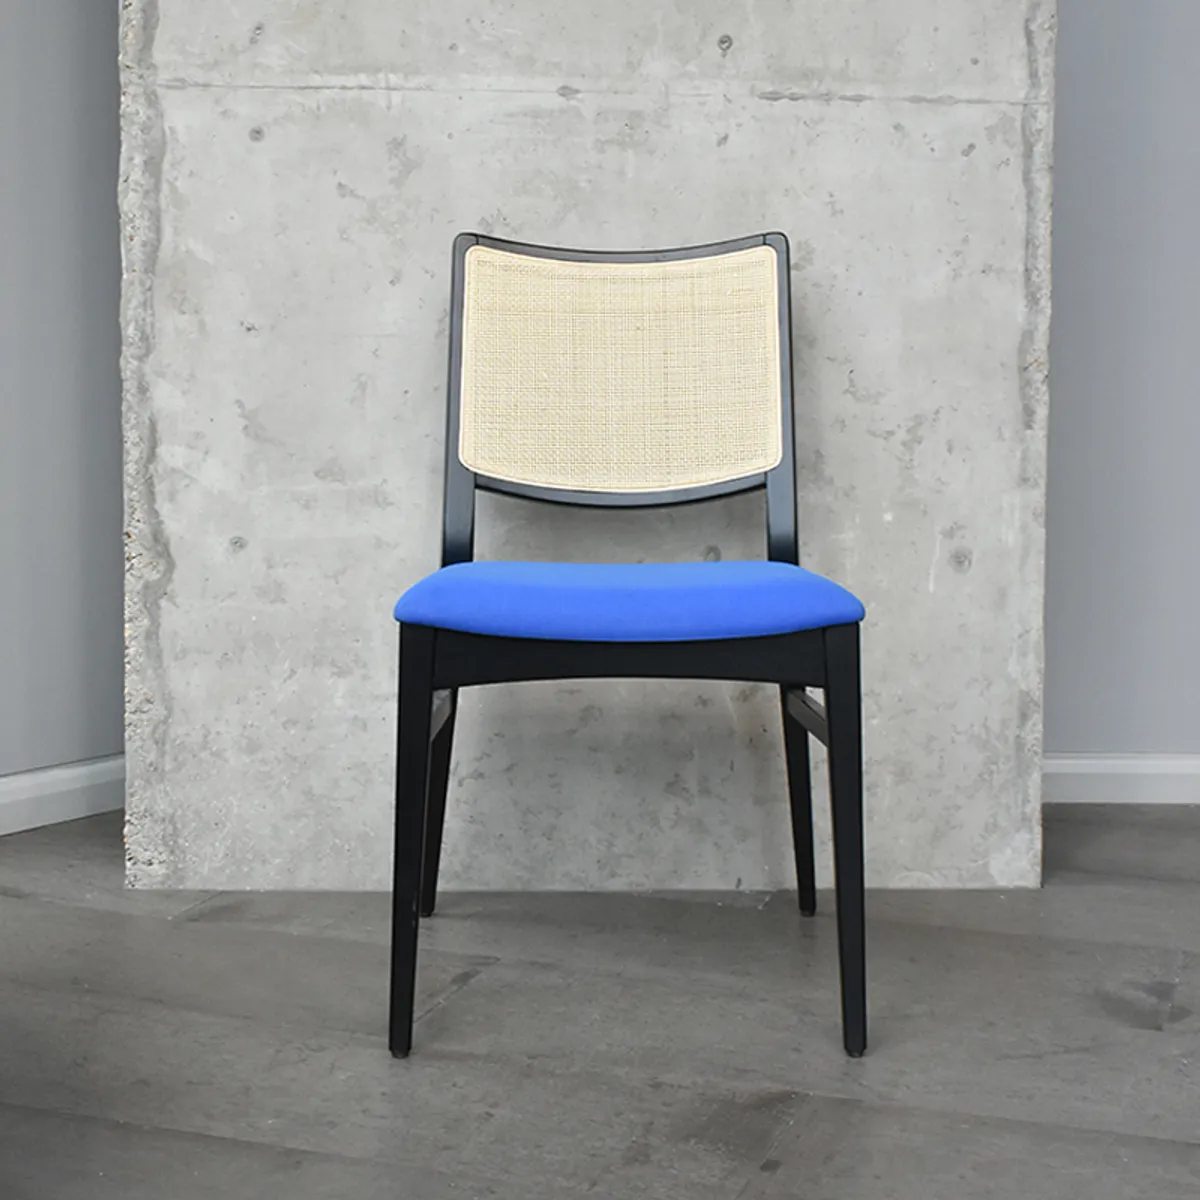 Spirit Wicker Side Chair furniture by insideoutcontracts 01